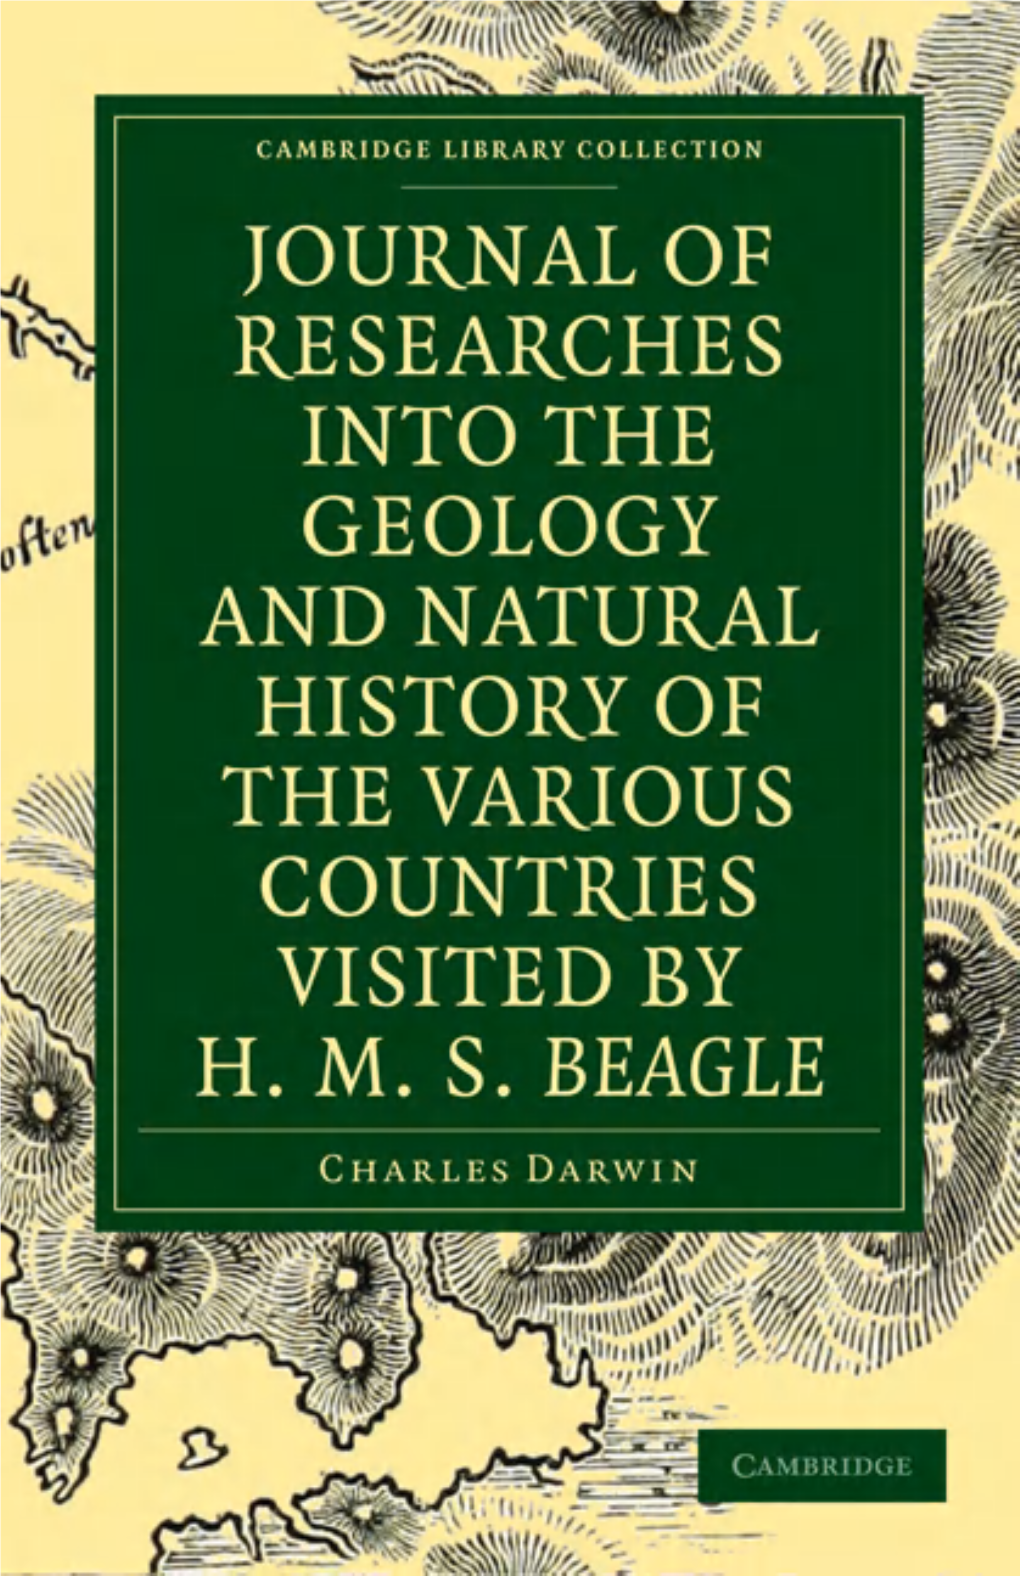 Journal of Researches Into the Geology and Natural History of the Various Countries Visited by H